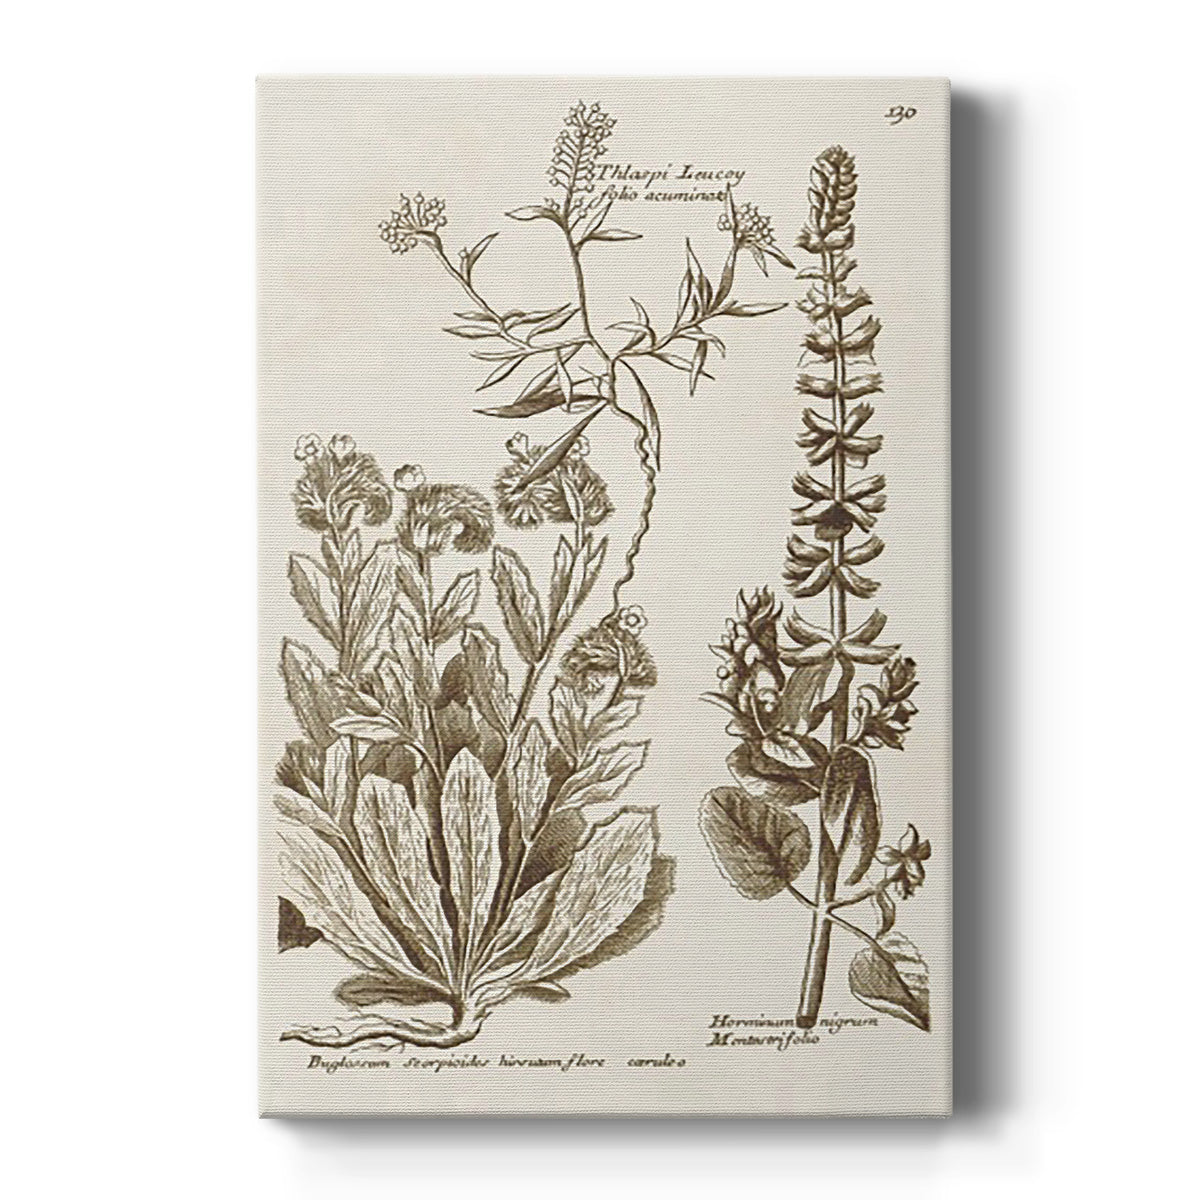 Sepia Botanical Journal IV Premium Gallery Wrapped Canvas - Ready to Hang